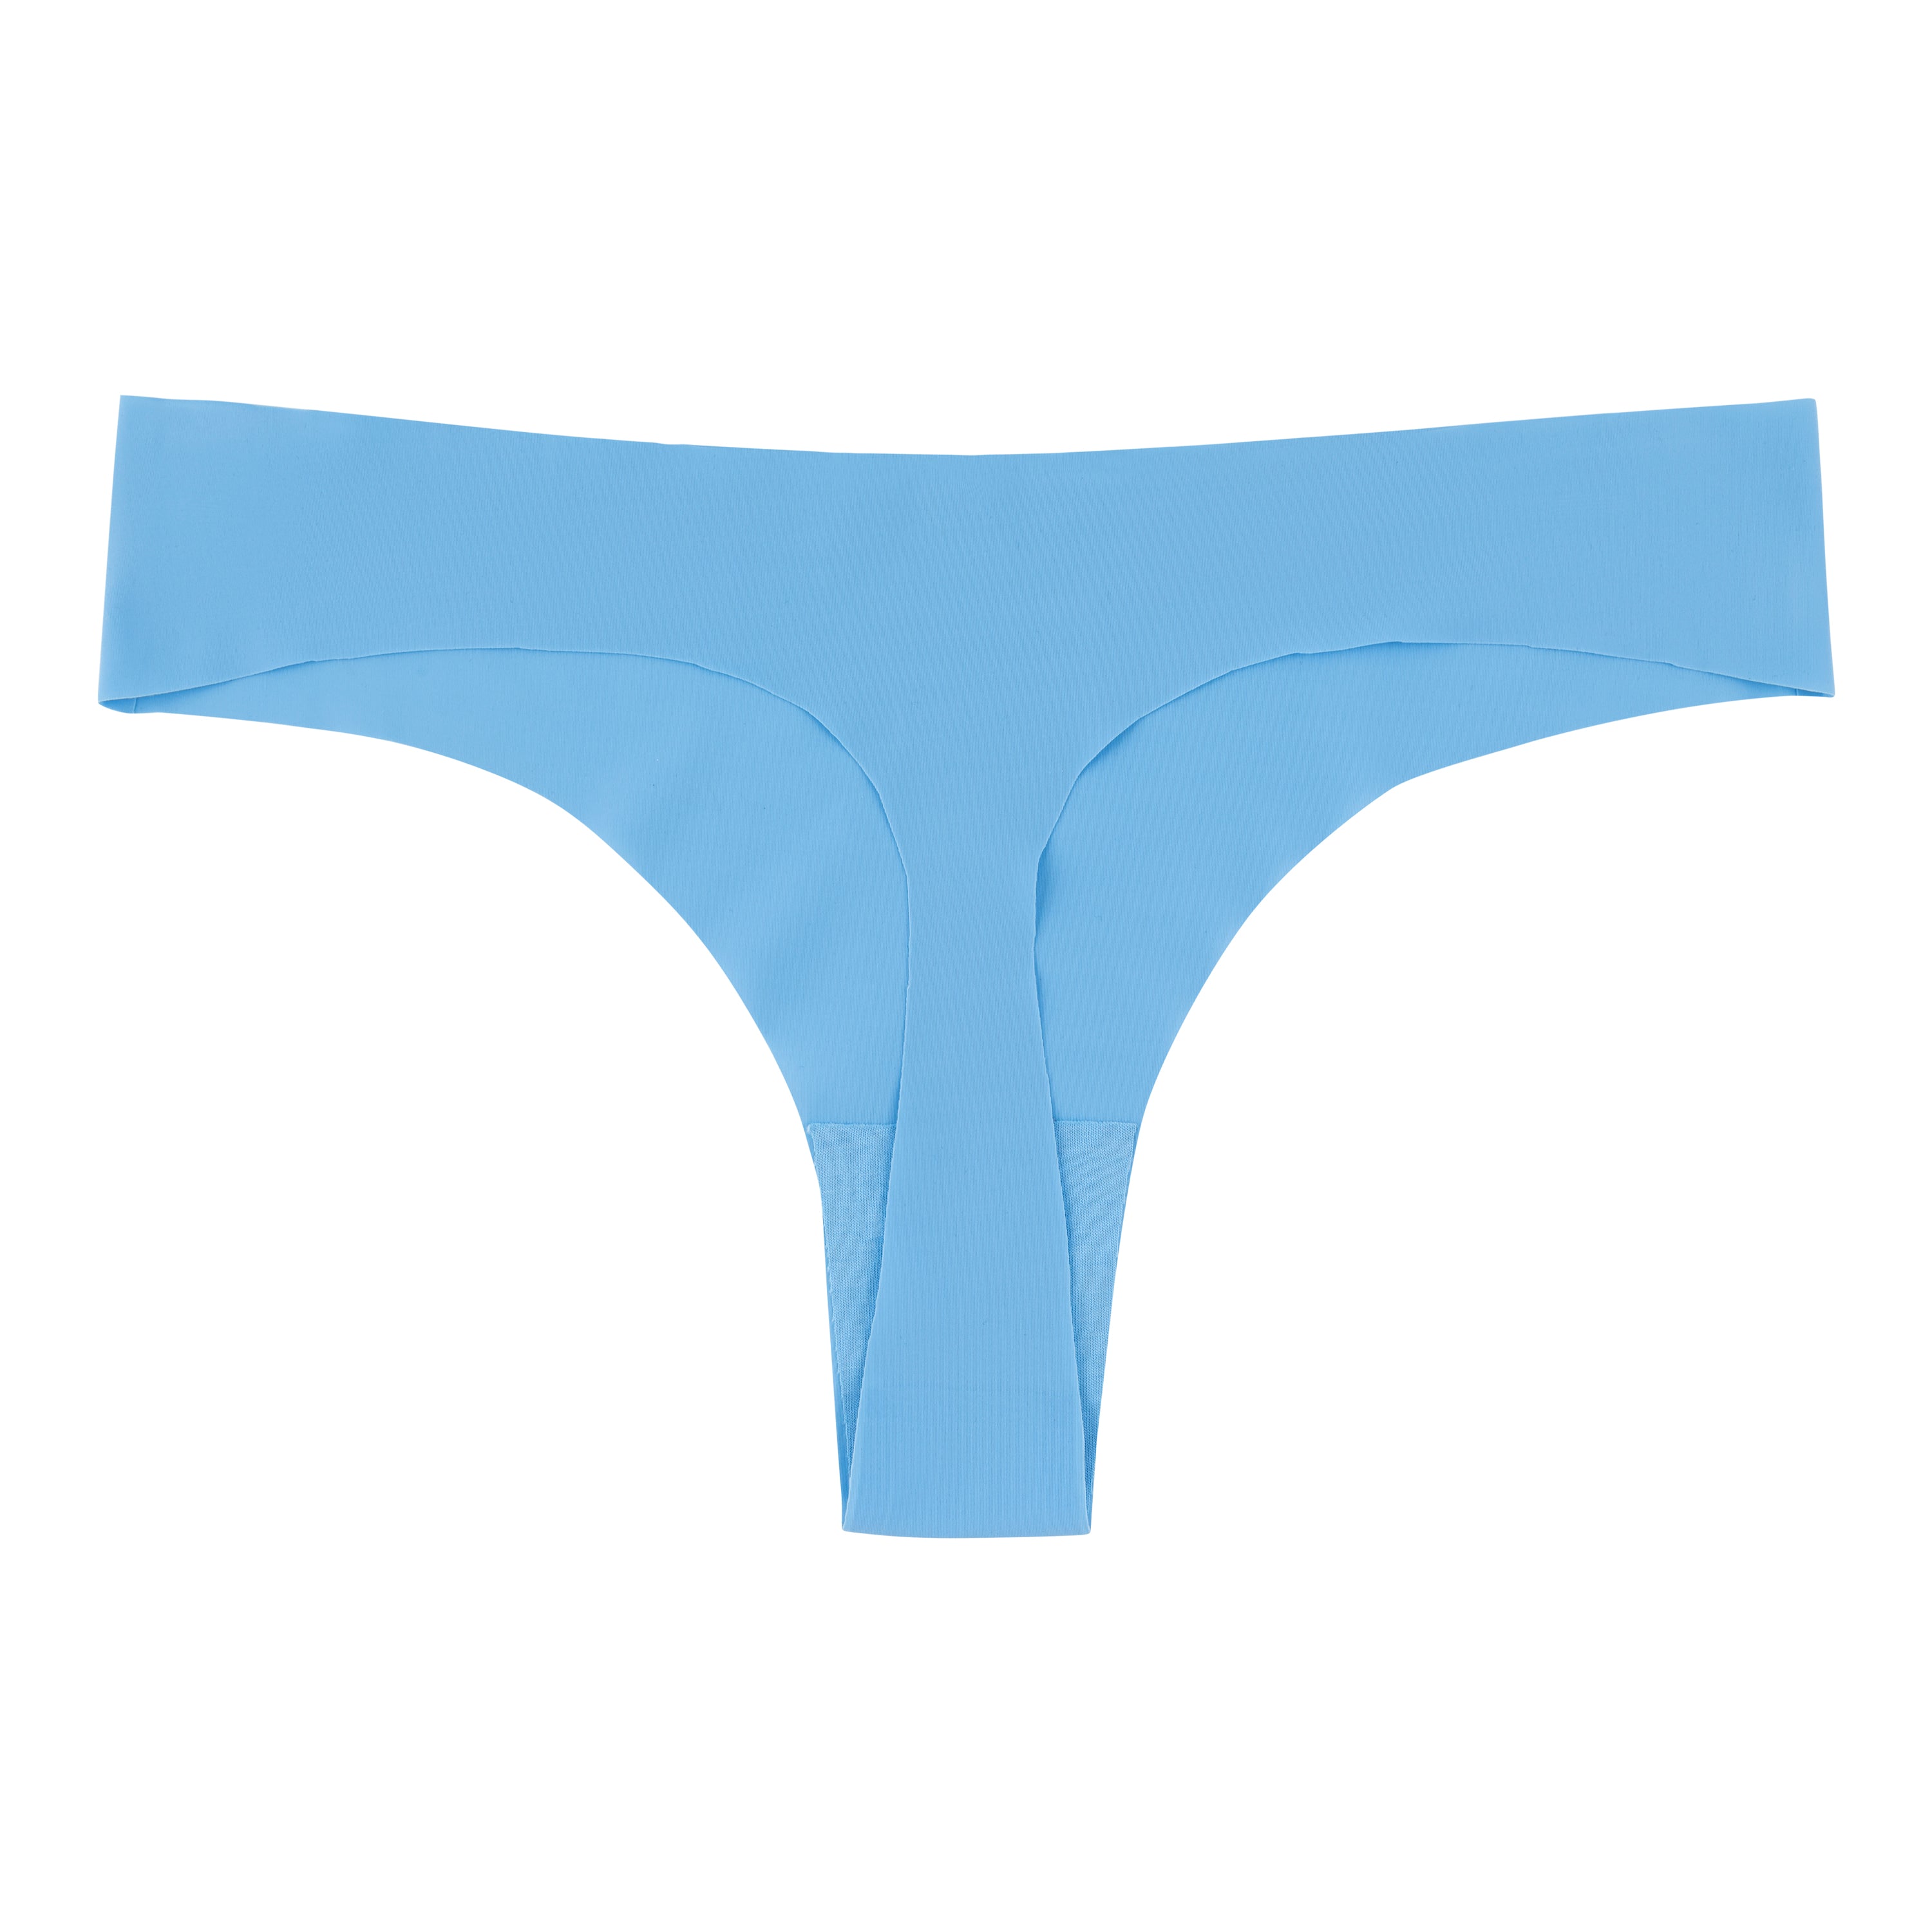 The Best Thongs for Working Out – Uwila Warrior